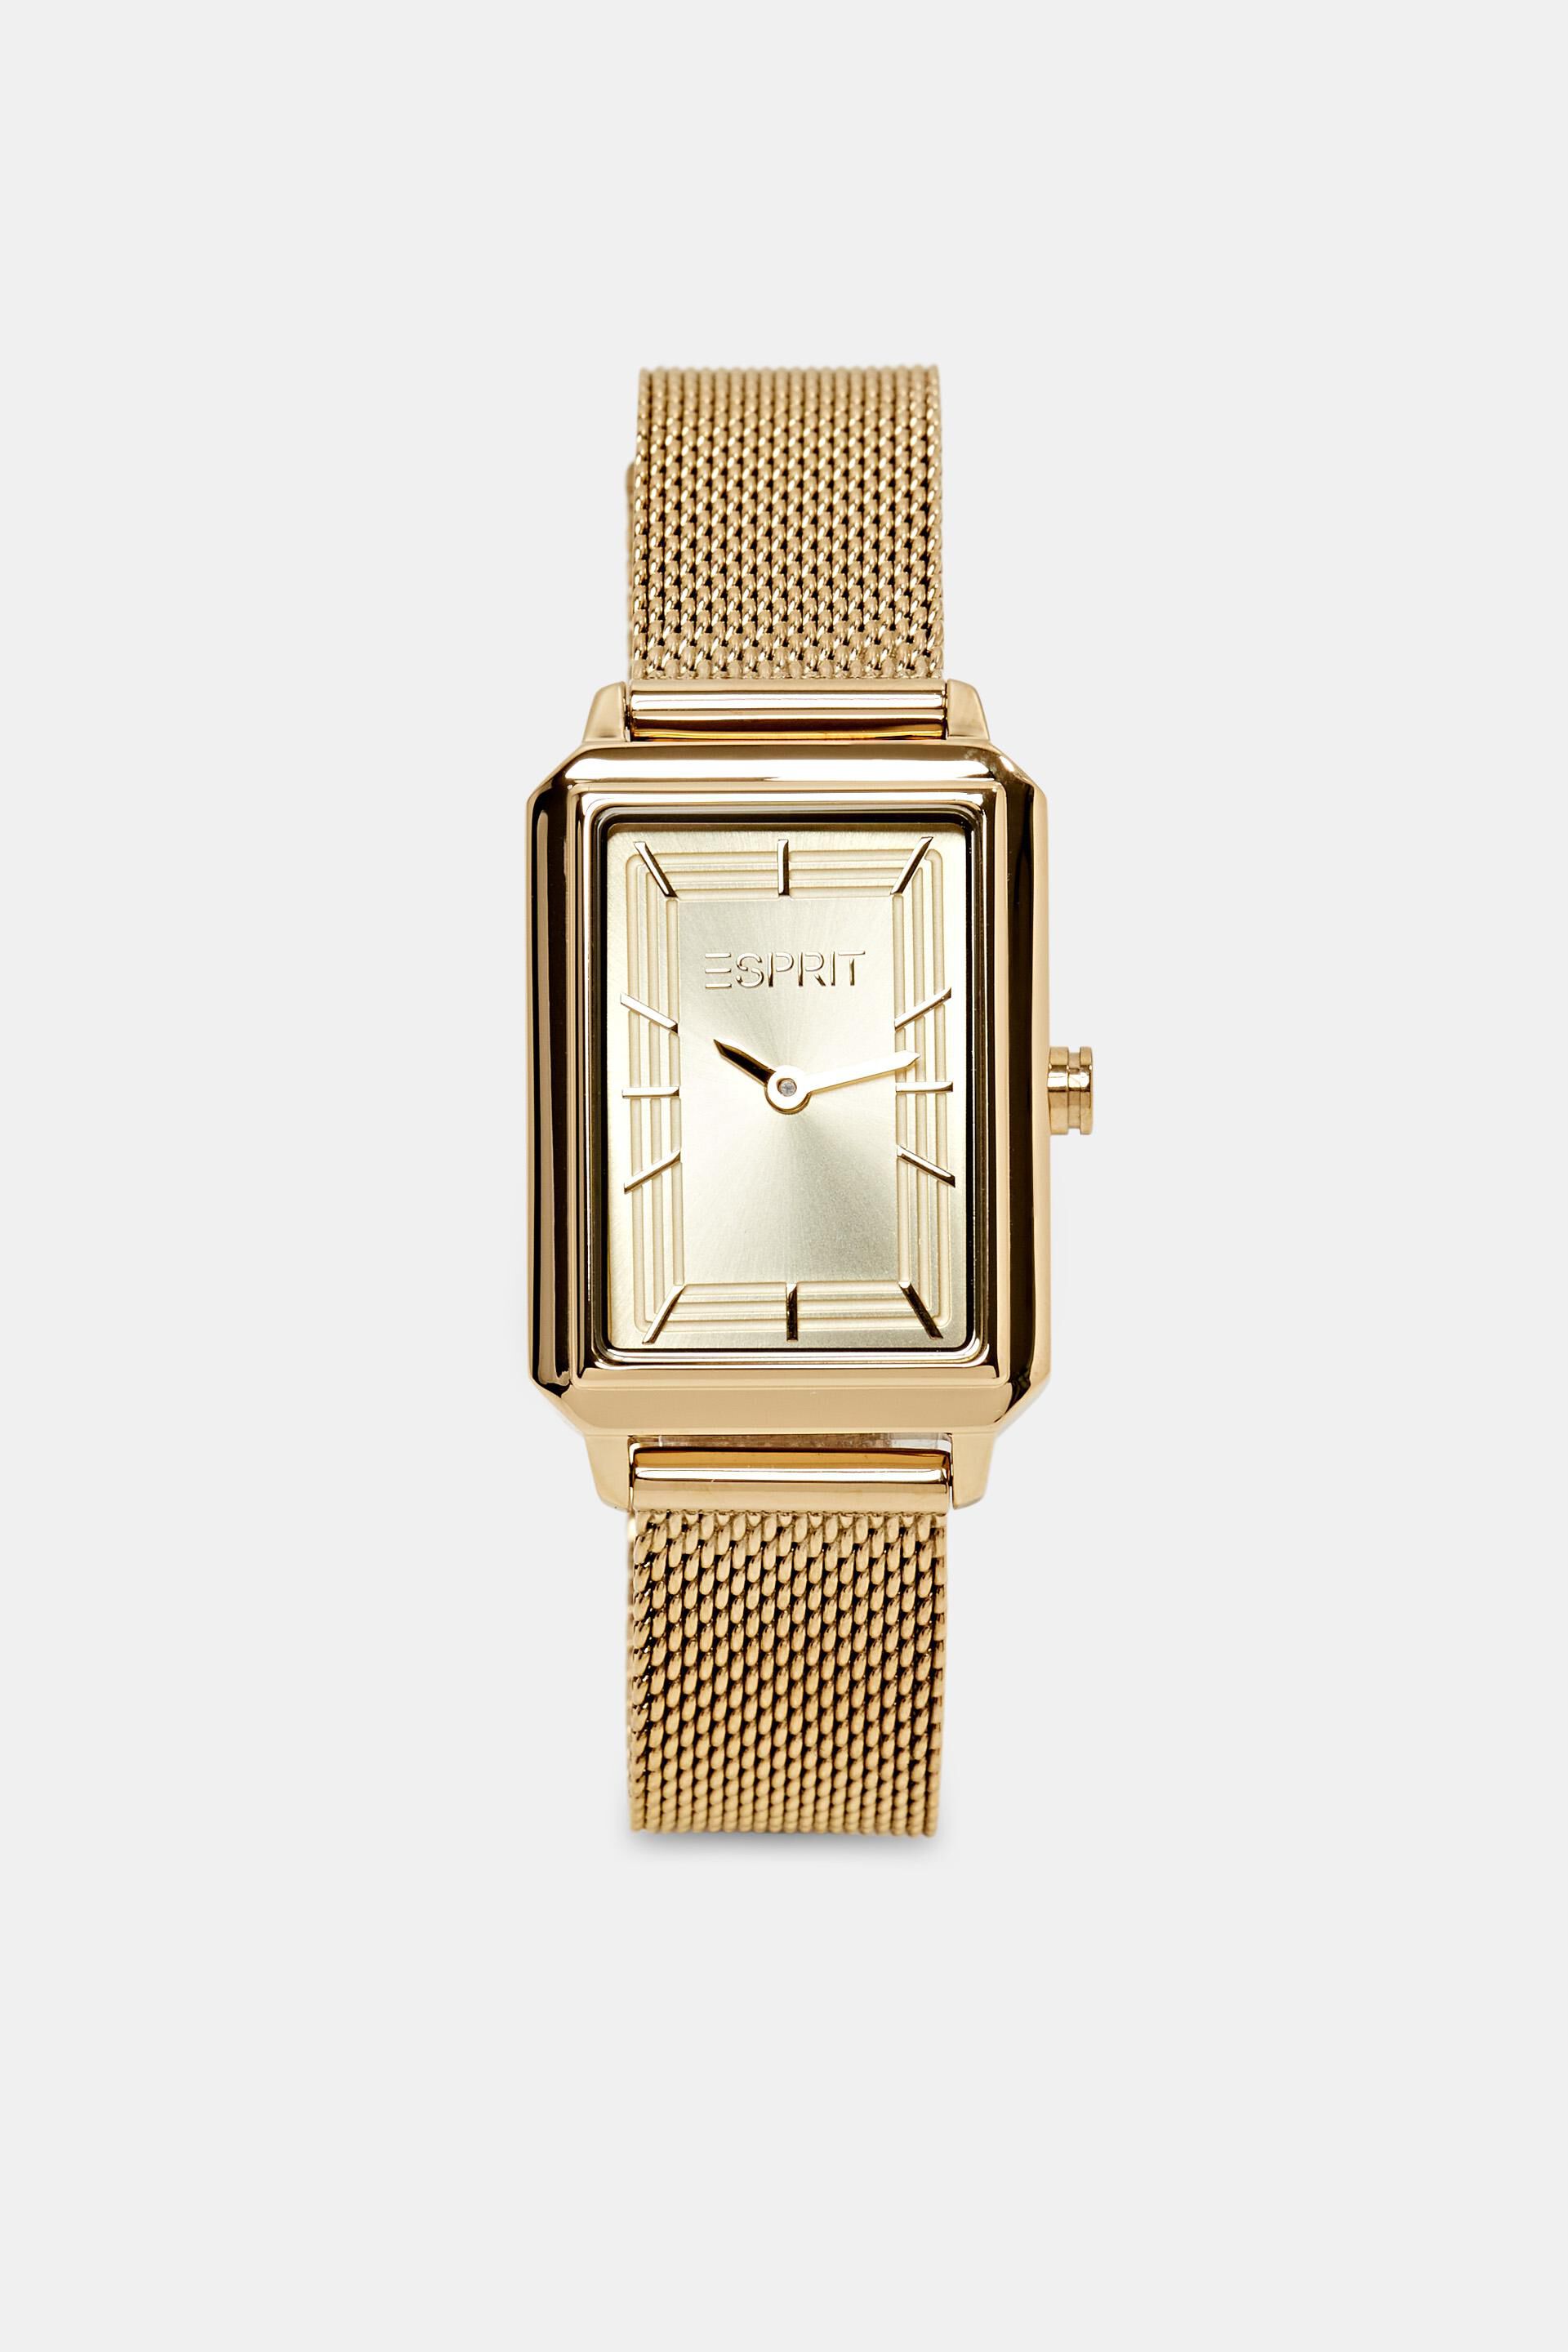 Esprit Online Store Square-shaped watch with a strap mesh